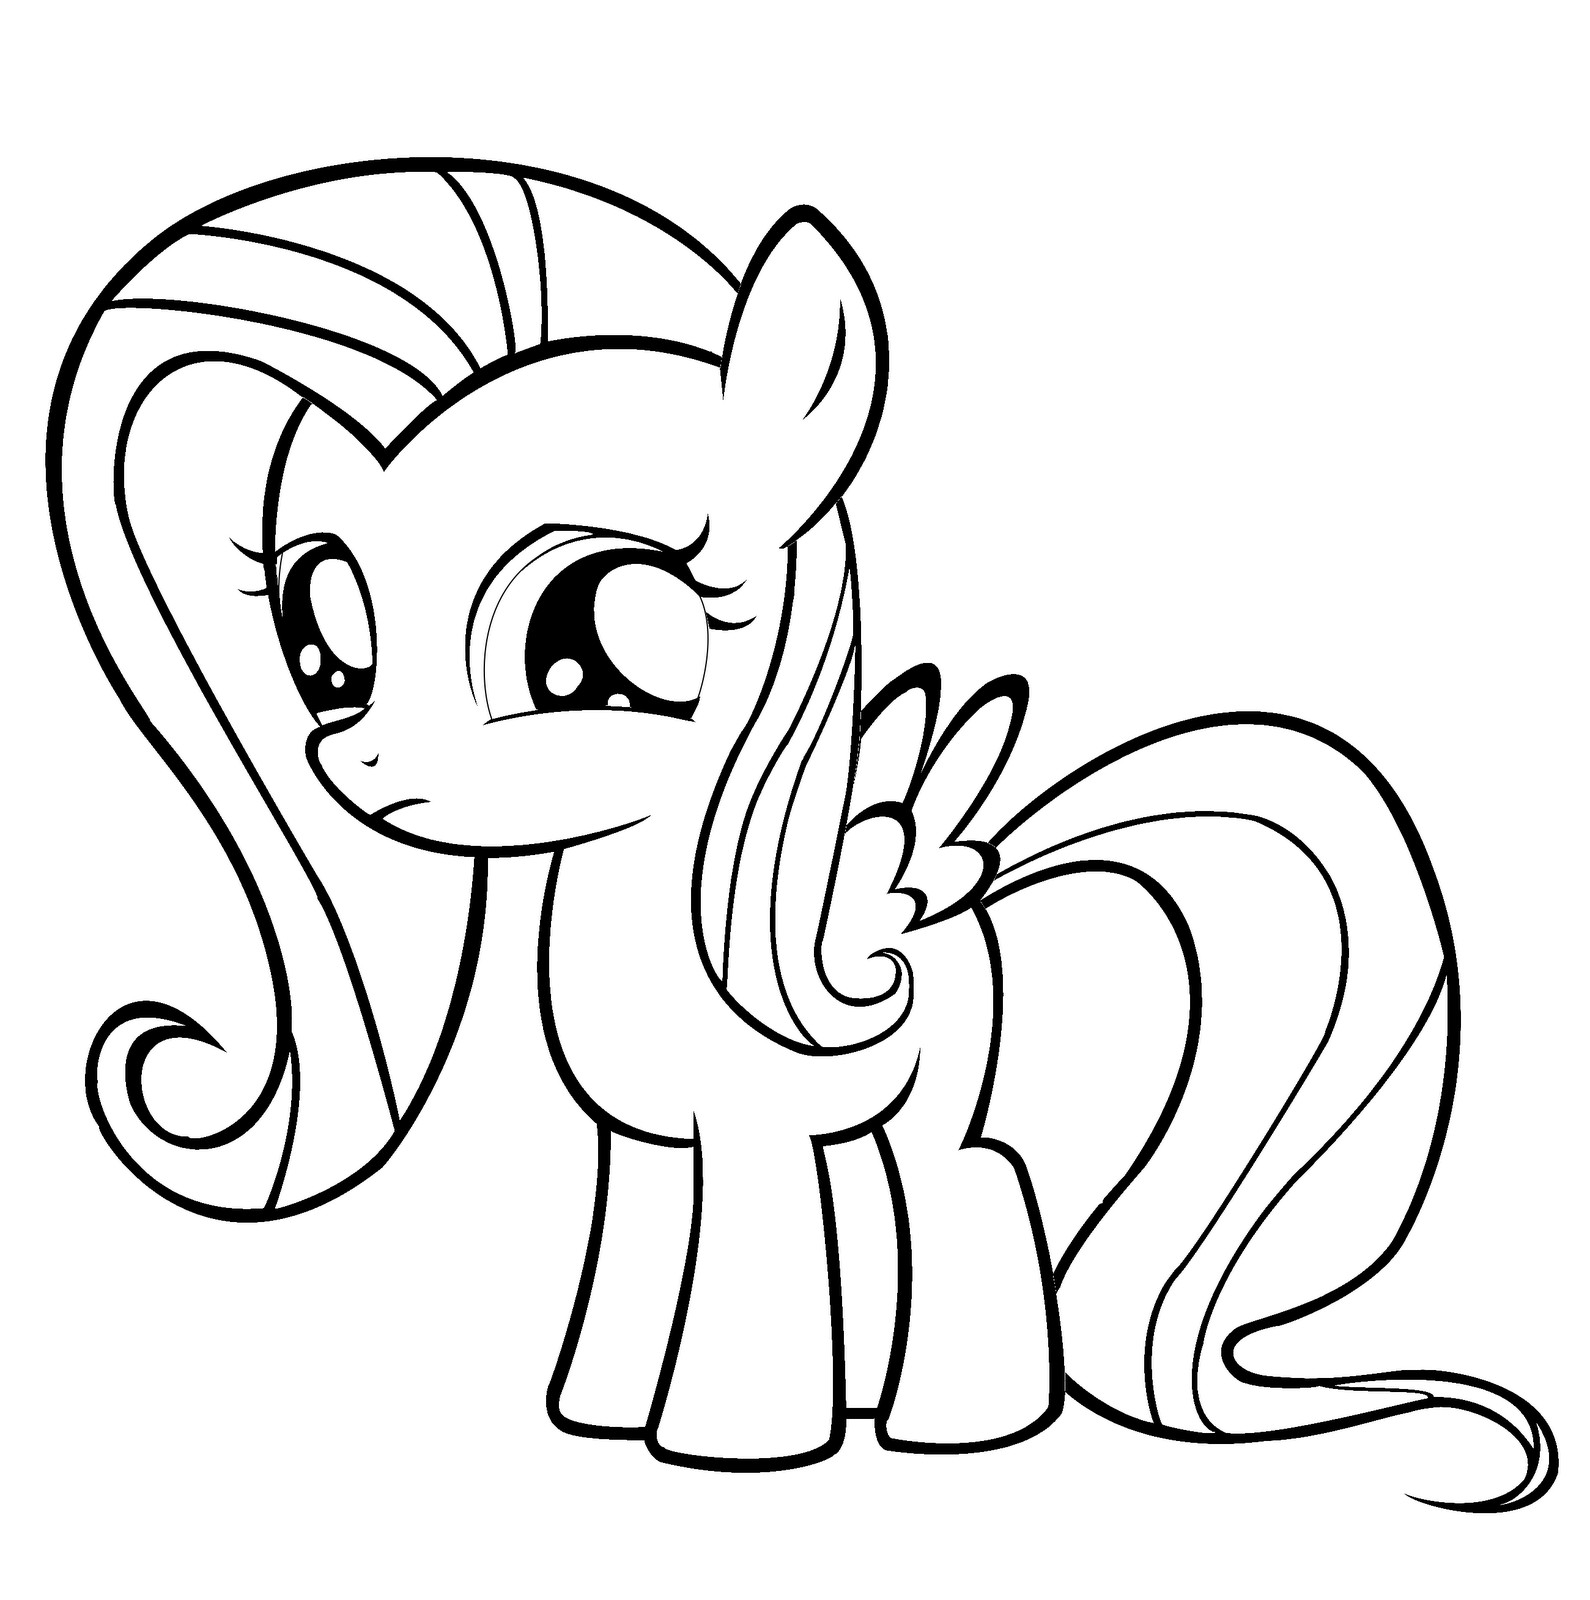 My Coloring Book
 Fluttershy Coloring Pages Best Coloring Pages For Kids